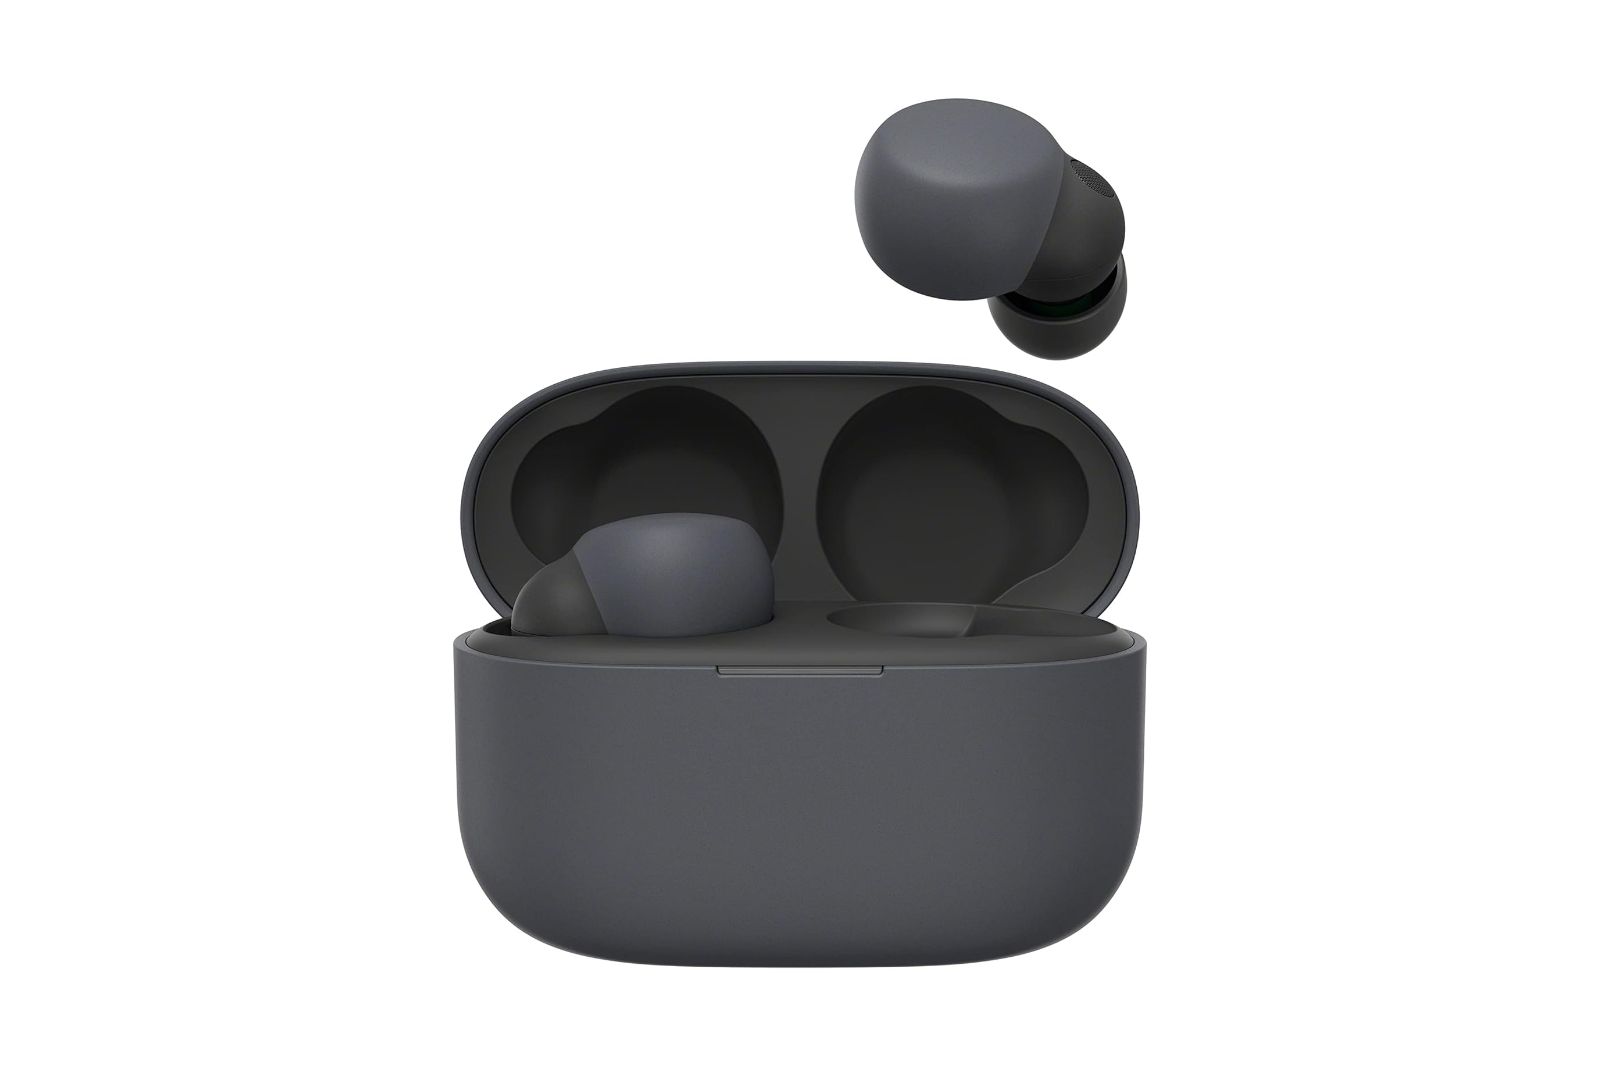 Bluish gray wireless earbuds floating above a charging case.